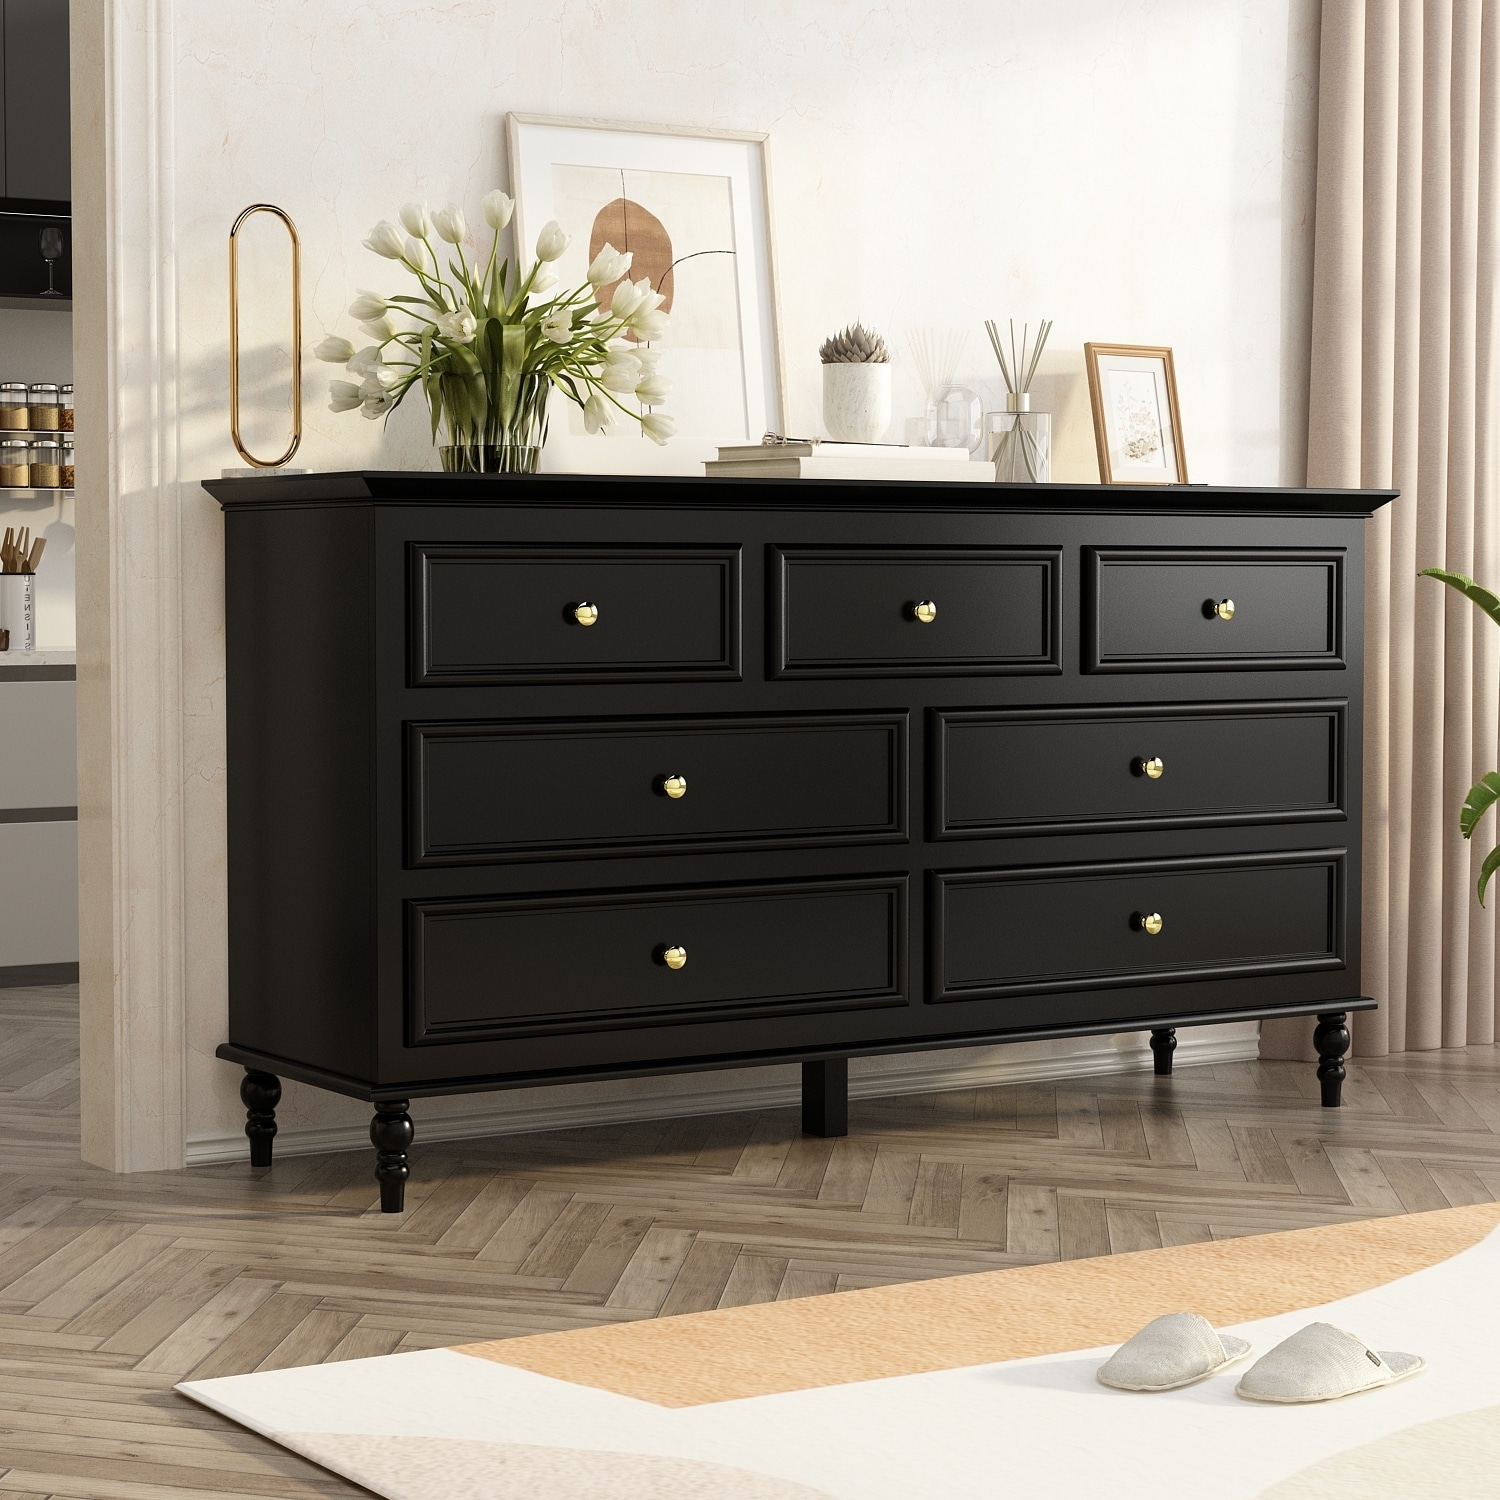 Contemporary 7 Drawer Bedroom Dresser with Modern Silver Color